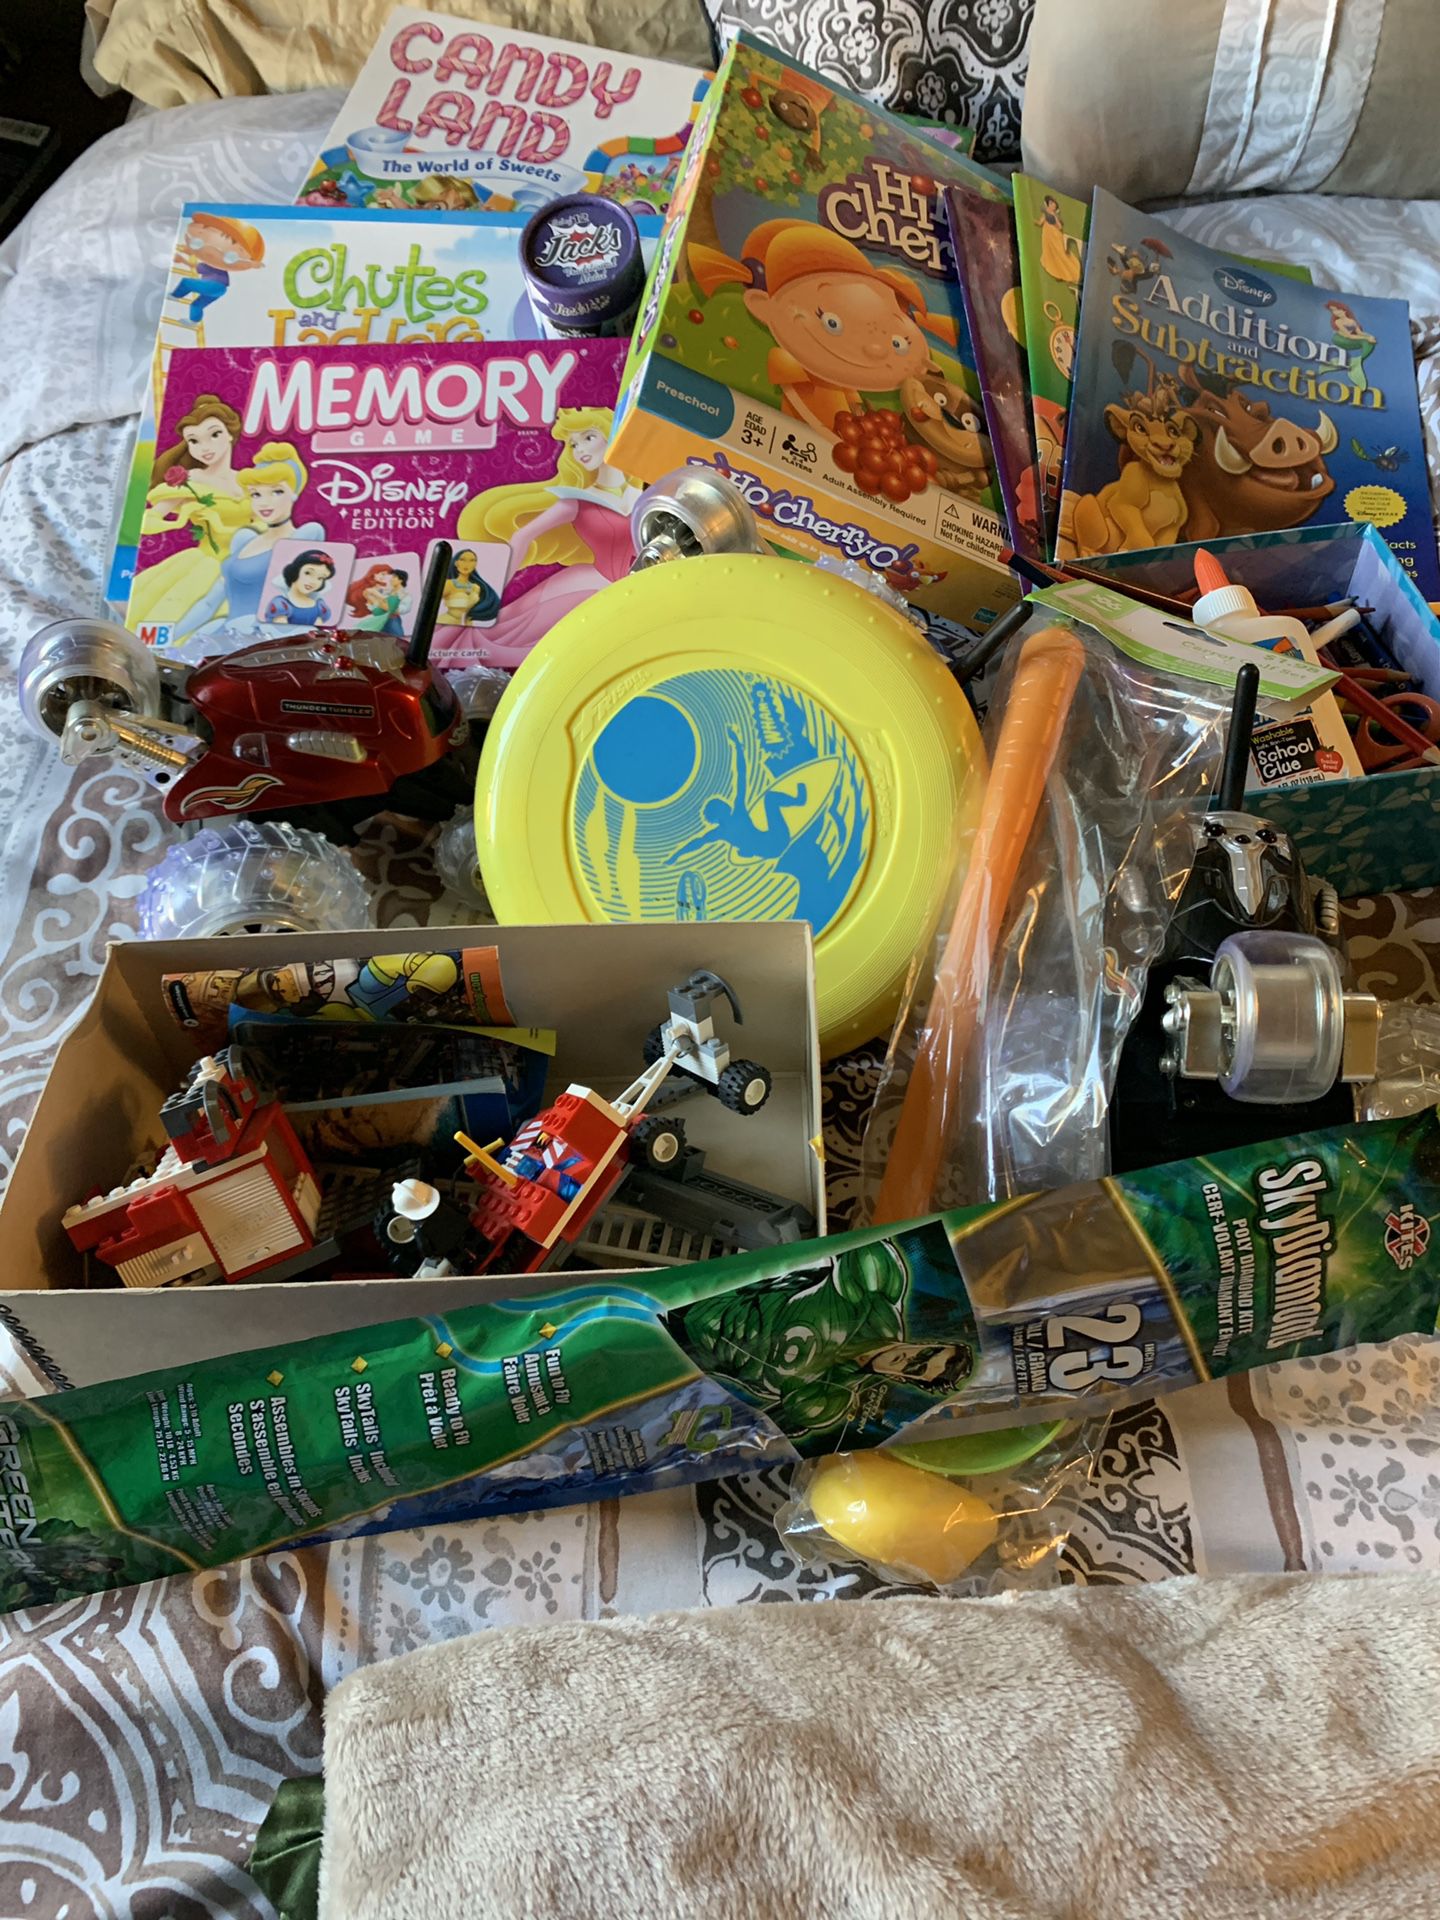 Miscellaneous kids board games and toys. Small set of Legos. Games are in excellent condition.